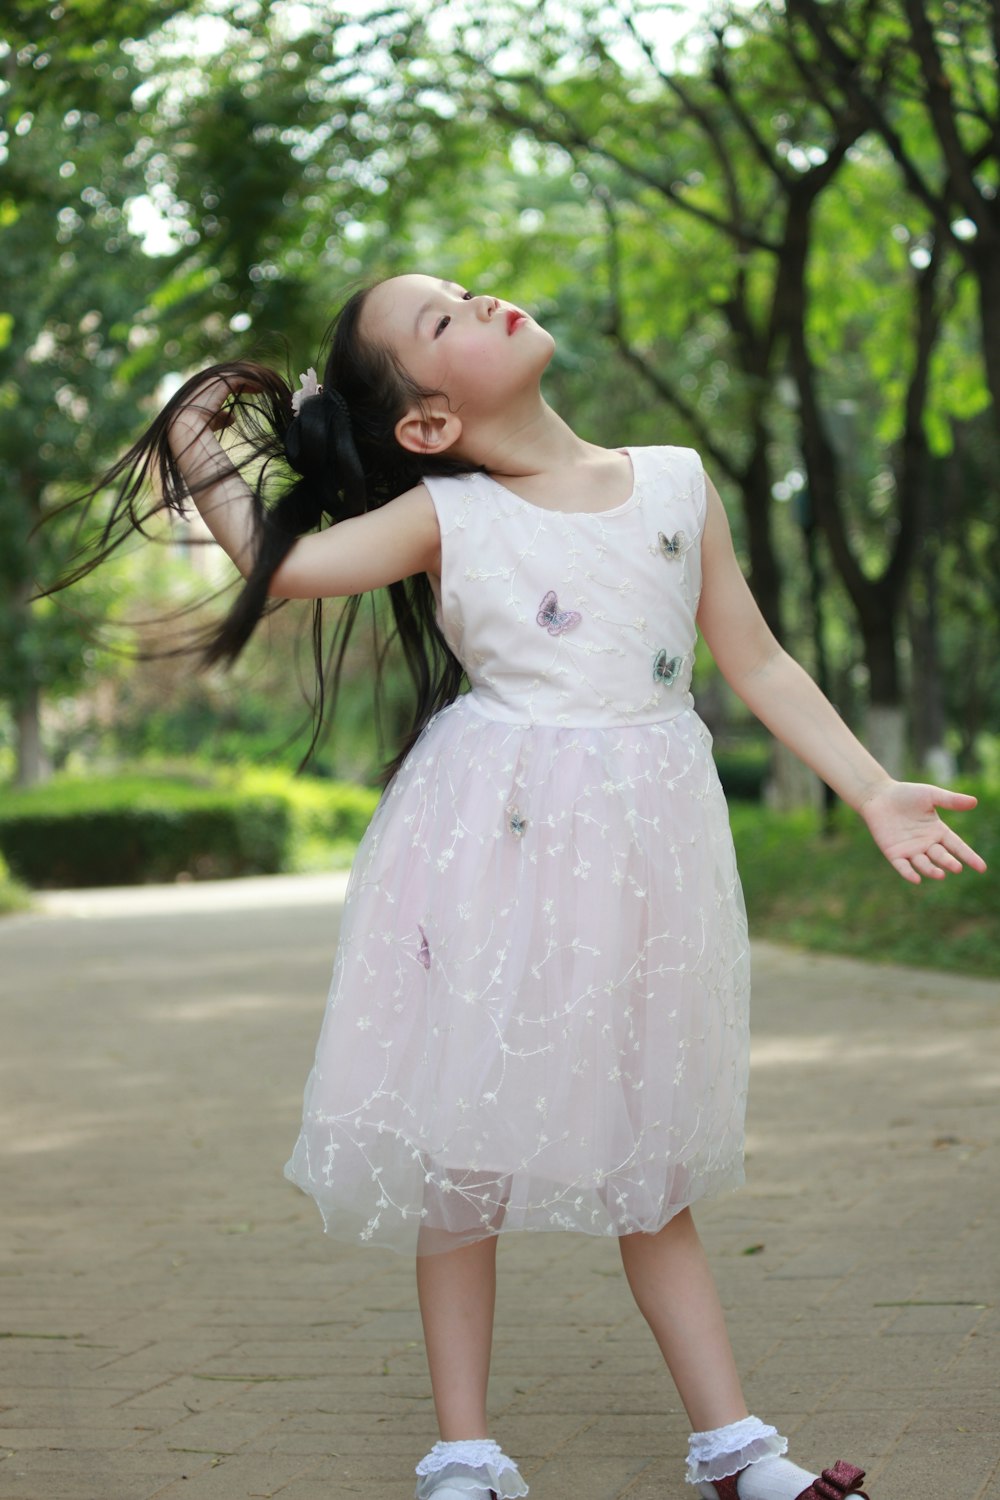 a young girl in a white dress holding her hair